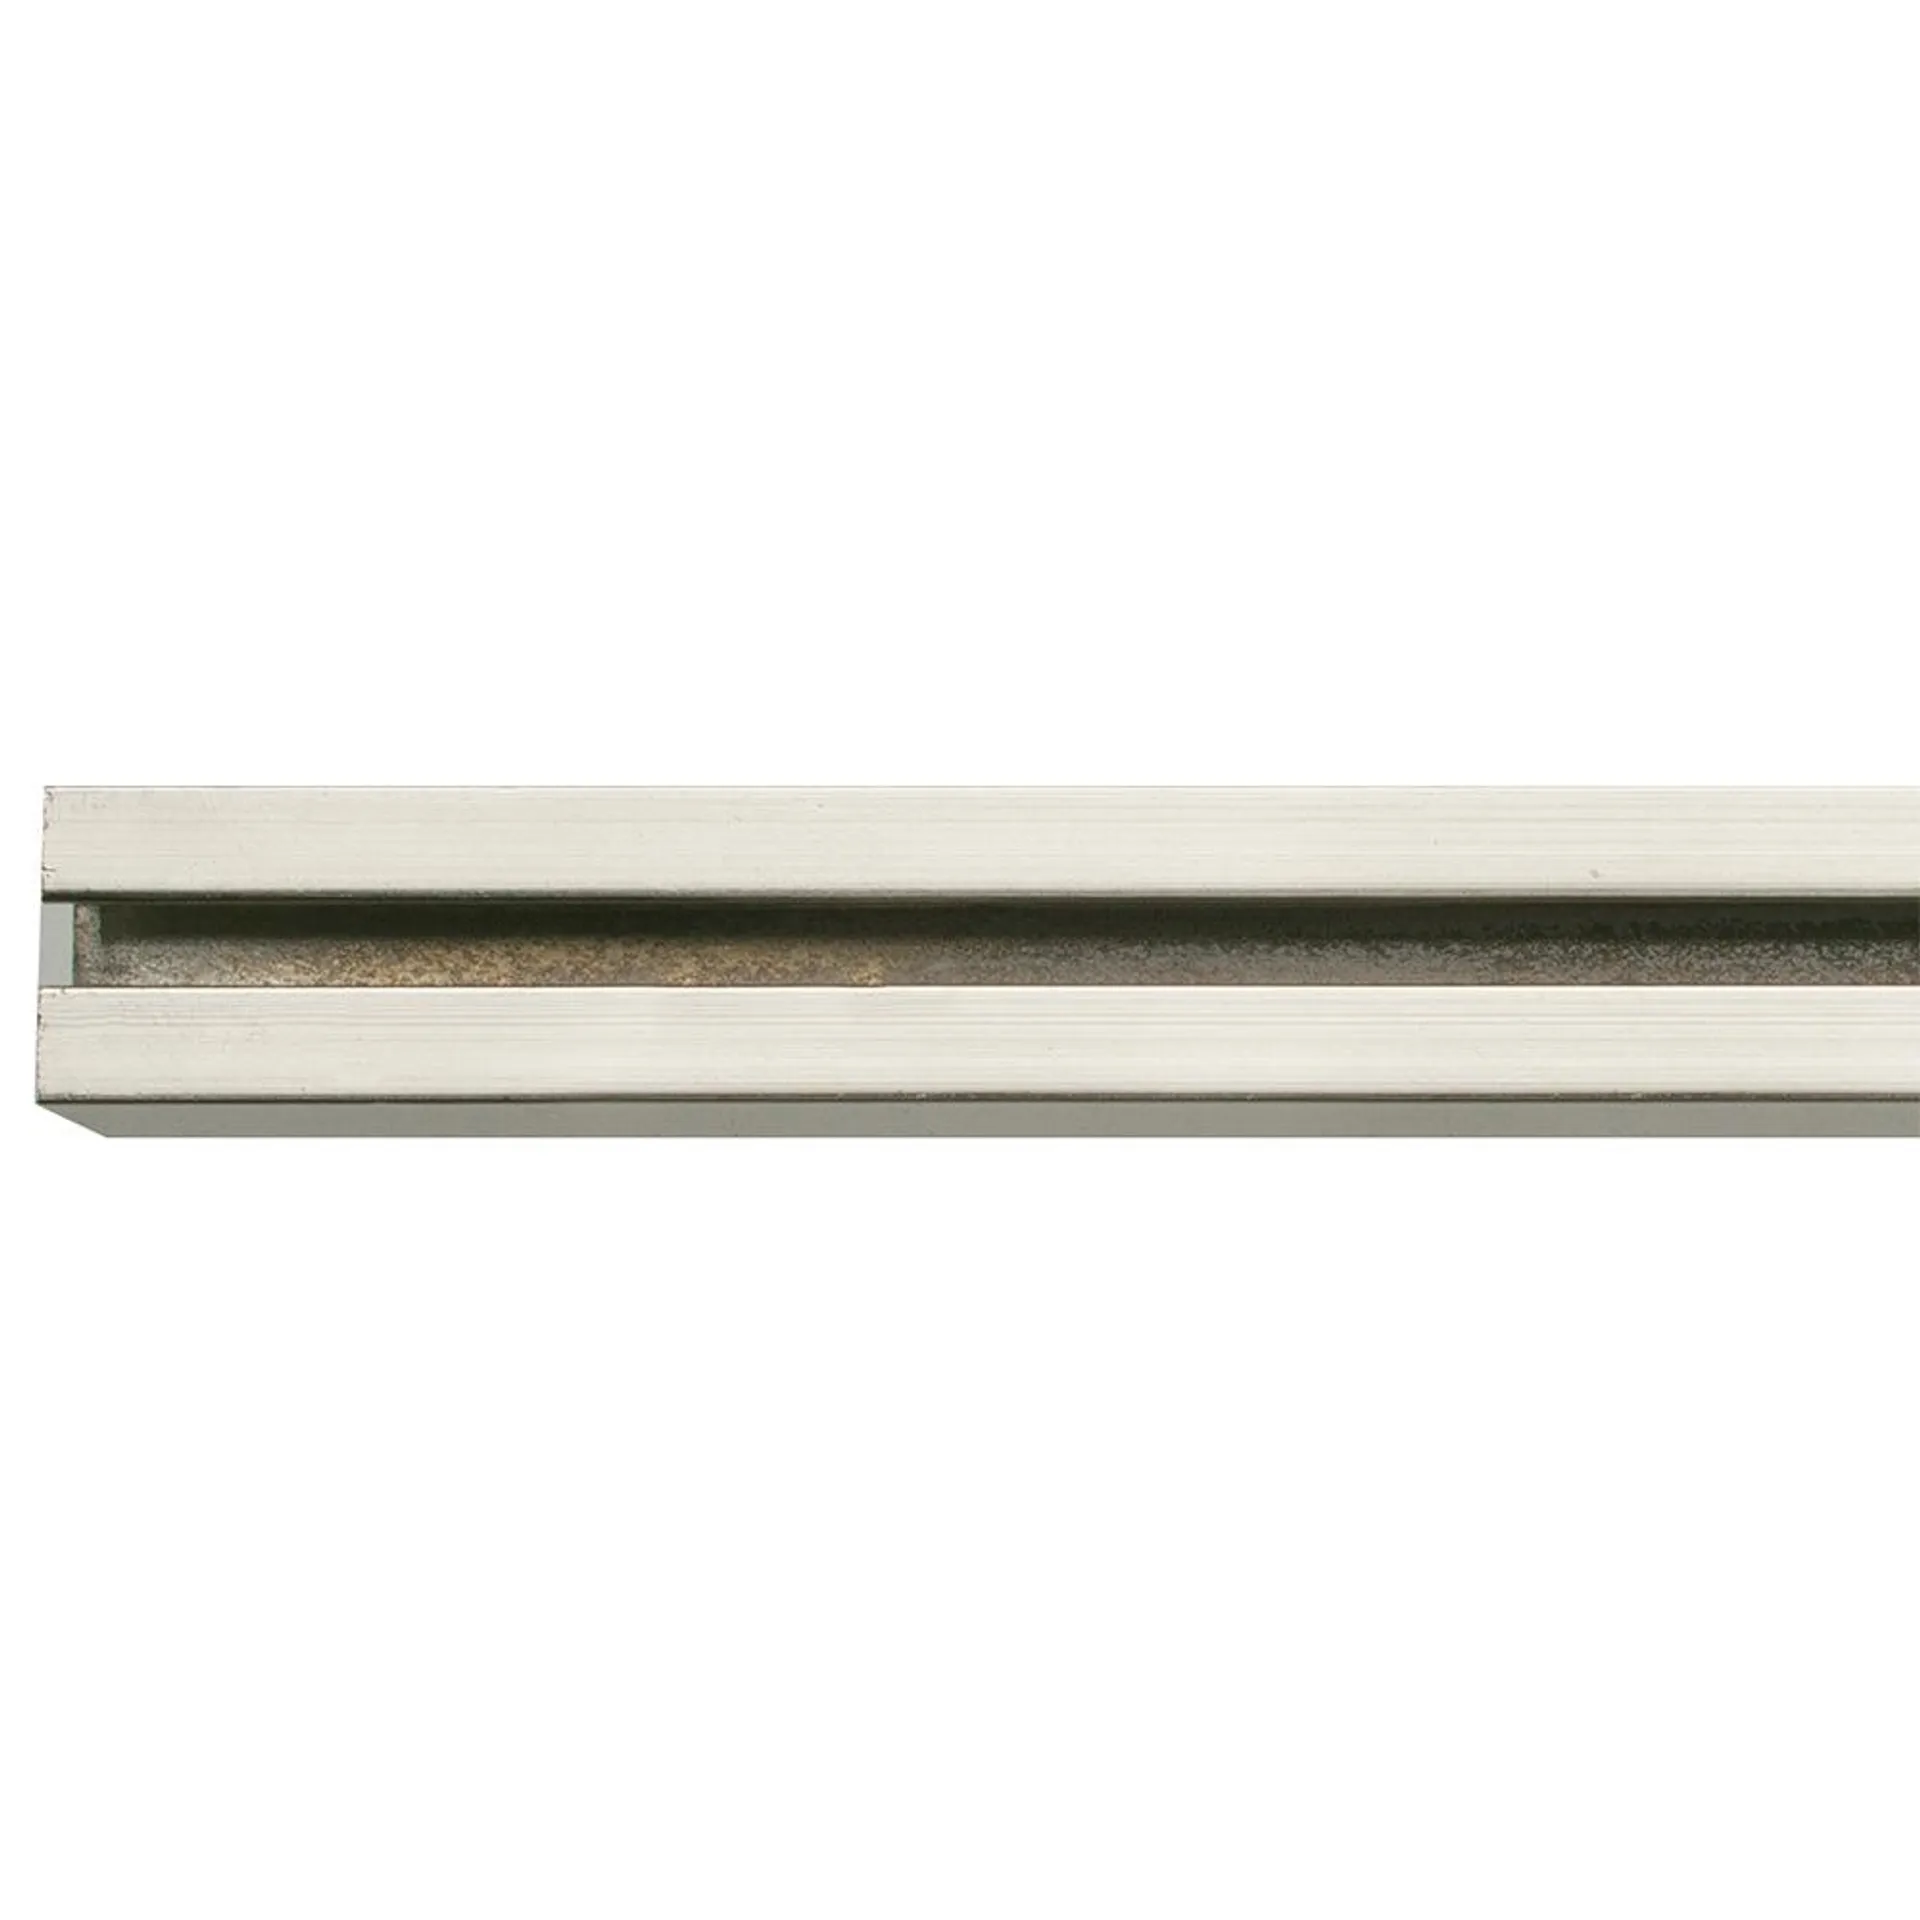 20 mm Metal Square Rod - Brushed Silver